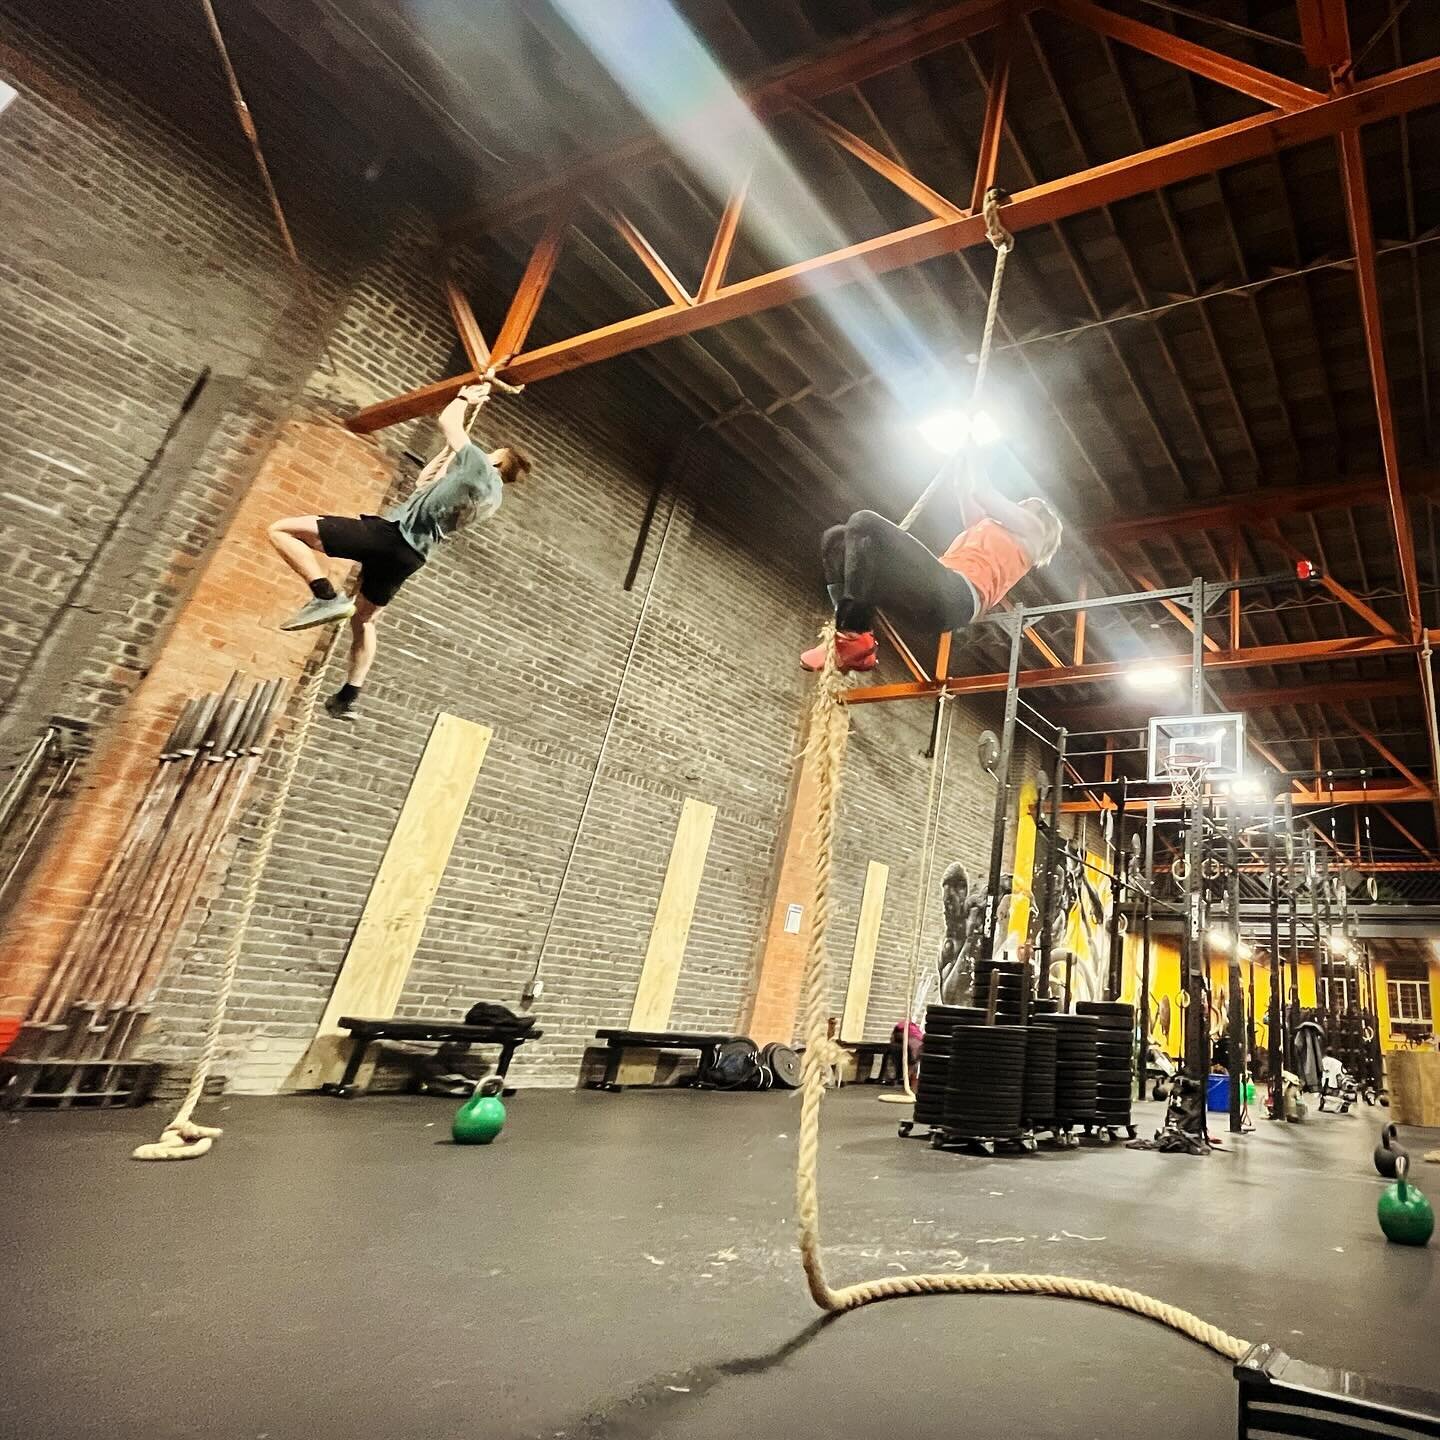 Yesterday's workout had us tackling rope climbs, with each of the three rounds culminating in five climbs. Let me tell you, by the end, I was utterly spent!

Growing up, I could never climb a rope in gym class. I always wanted to, but never had the s